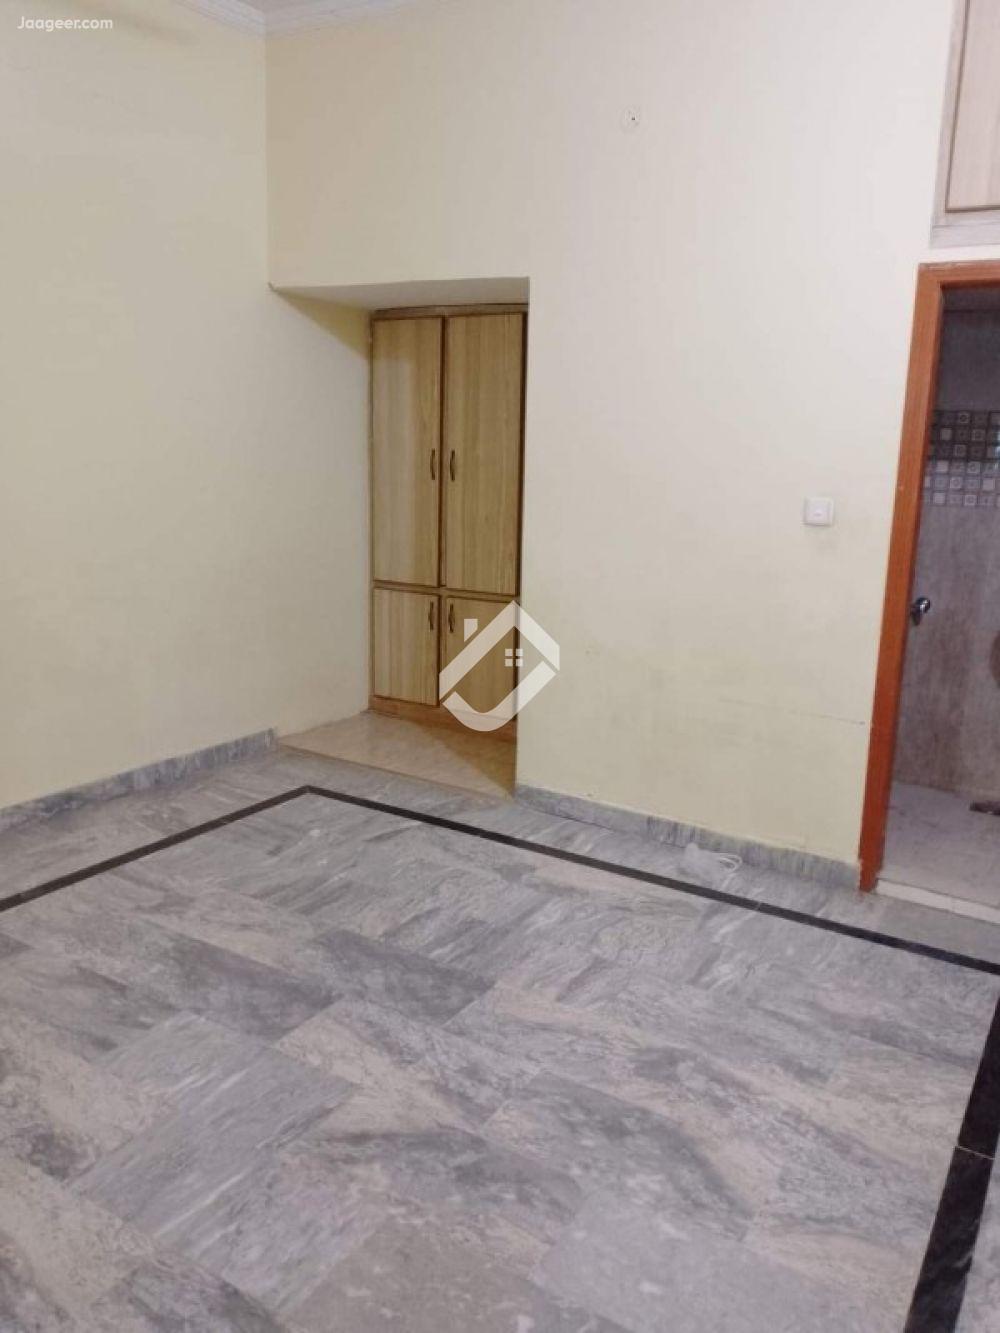 View  4 Marla Upper Portion House For Rent In Ghauri Town Phase 4A in Ghauri Town, Islamabad